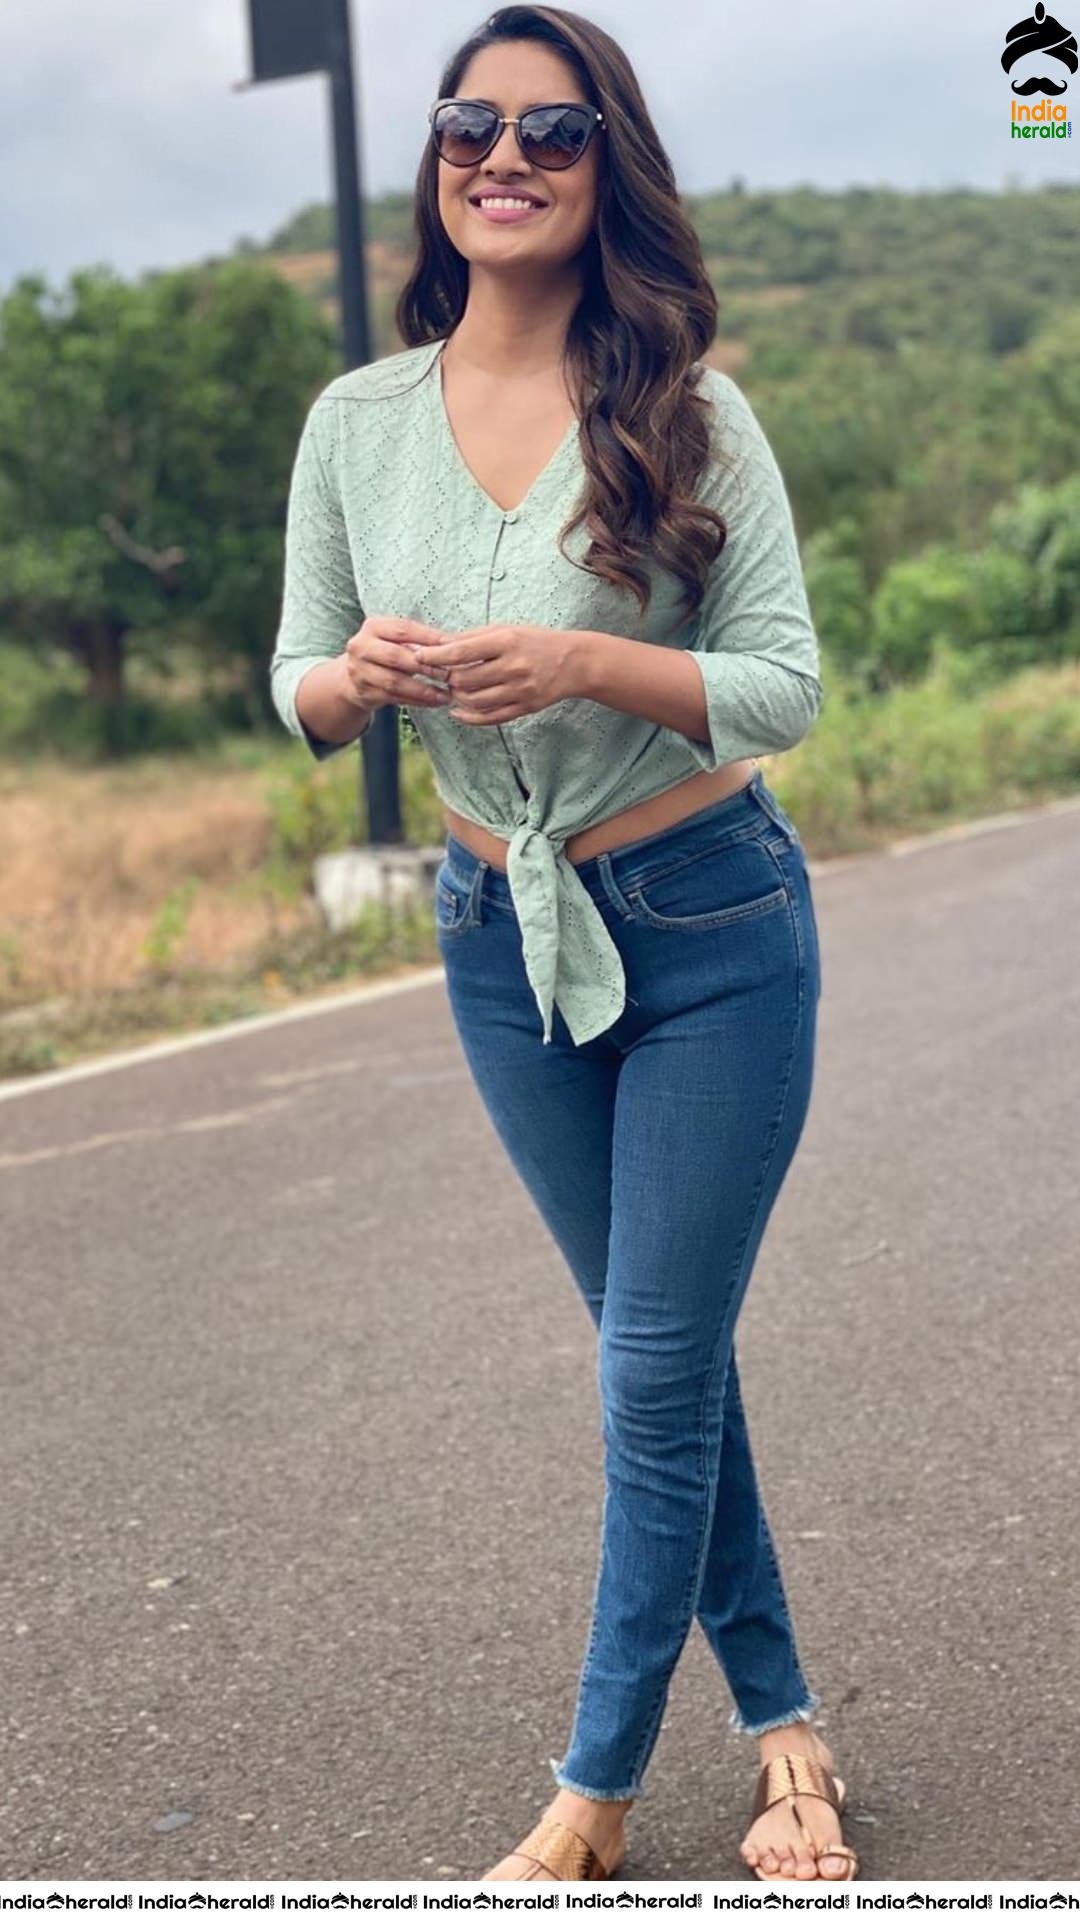 Vani Bhojan from the sets of her next flick